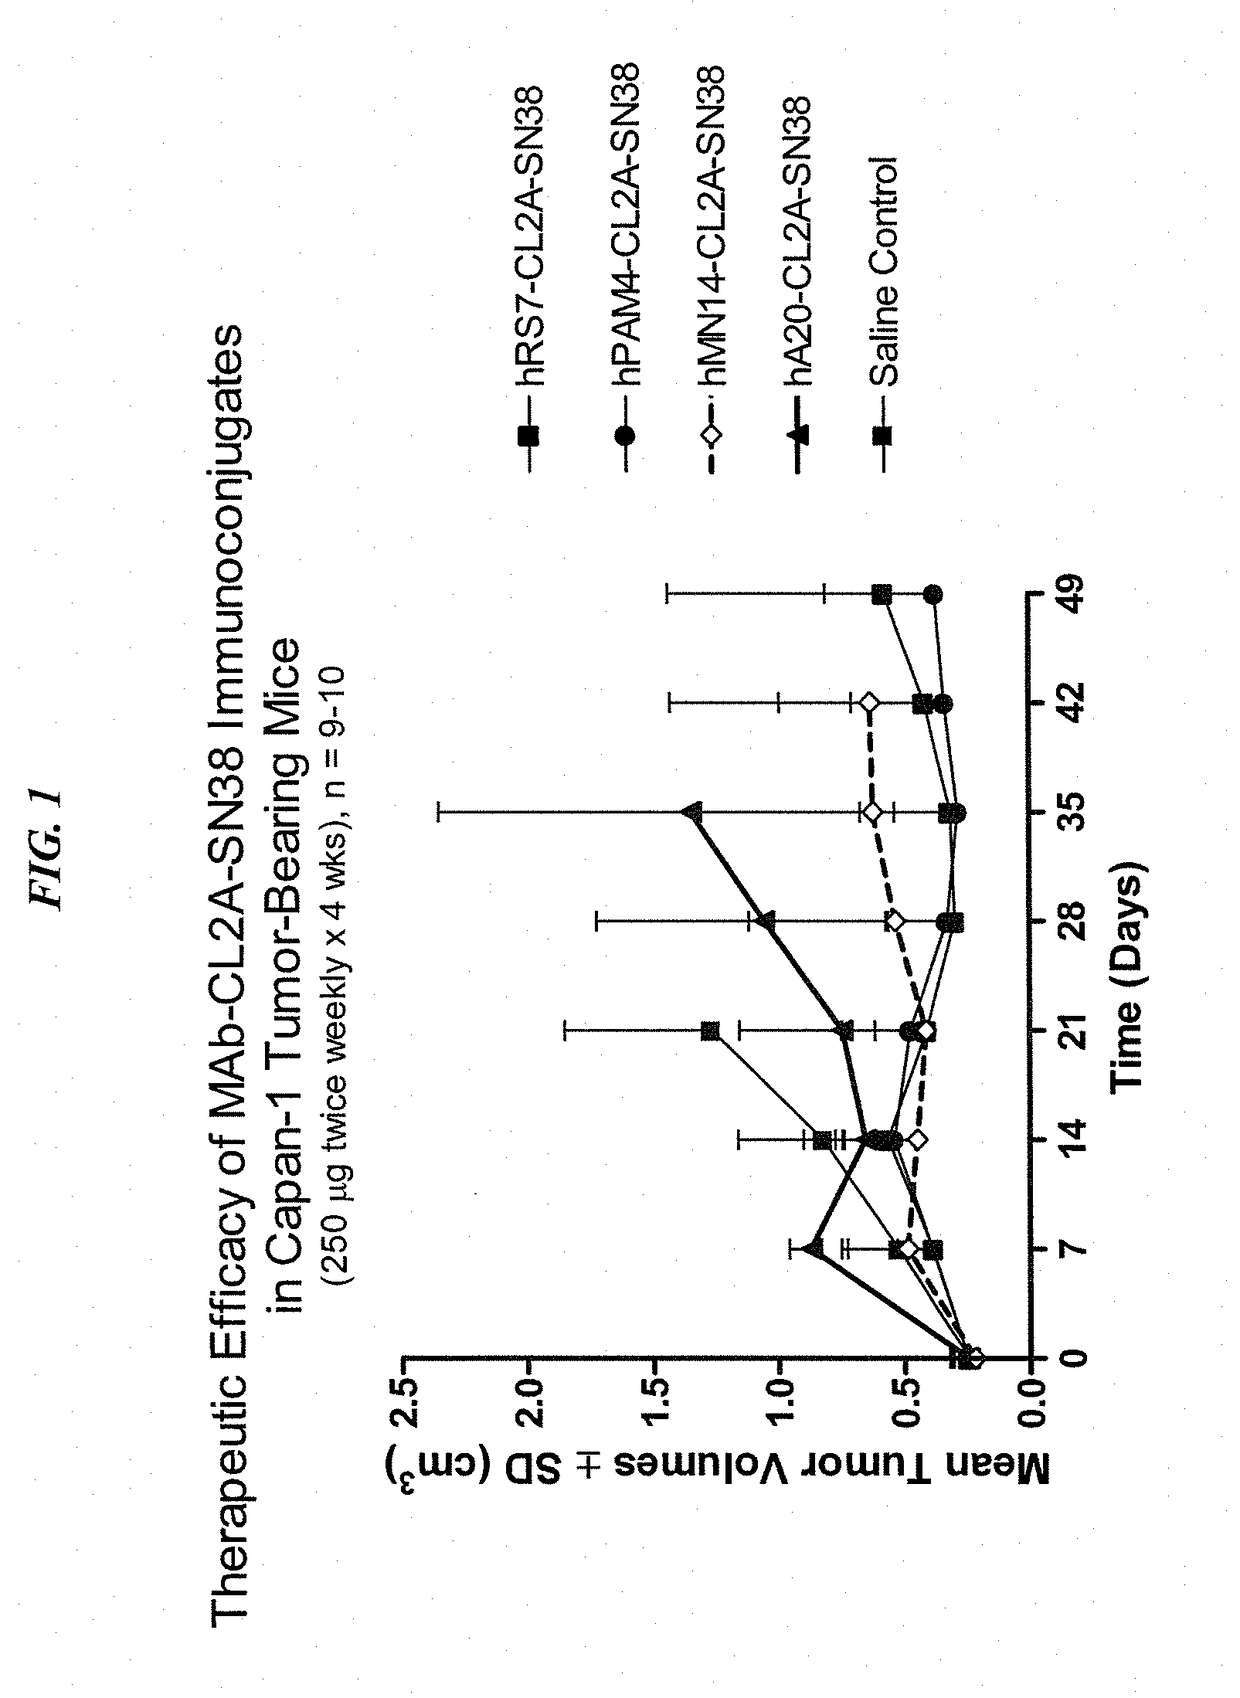 Subcutaneous administration of antibody-drug conjugates for cancer therapy